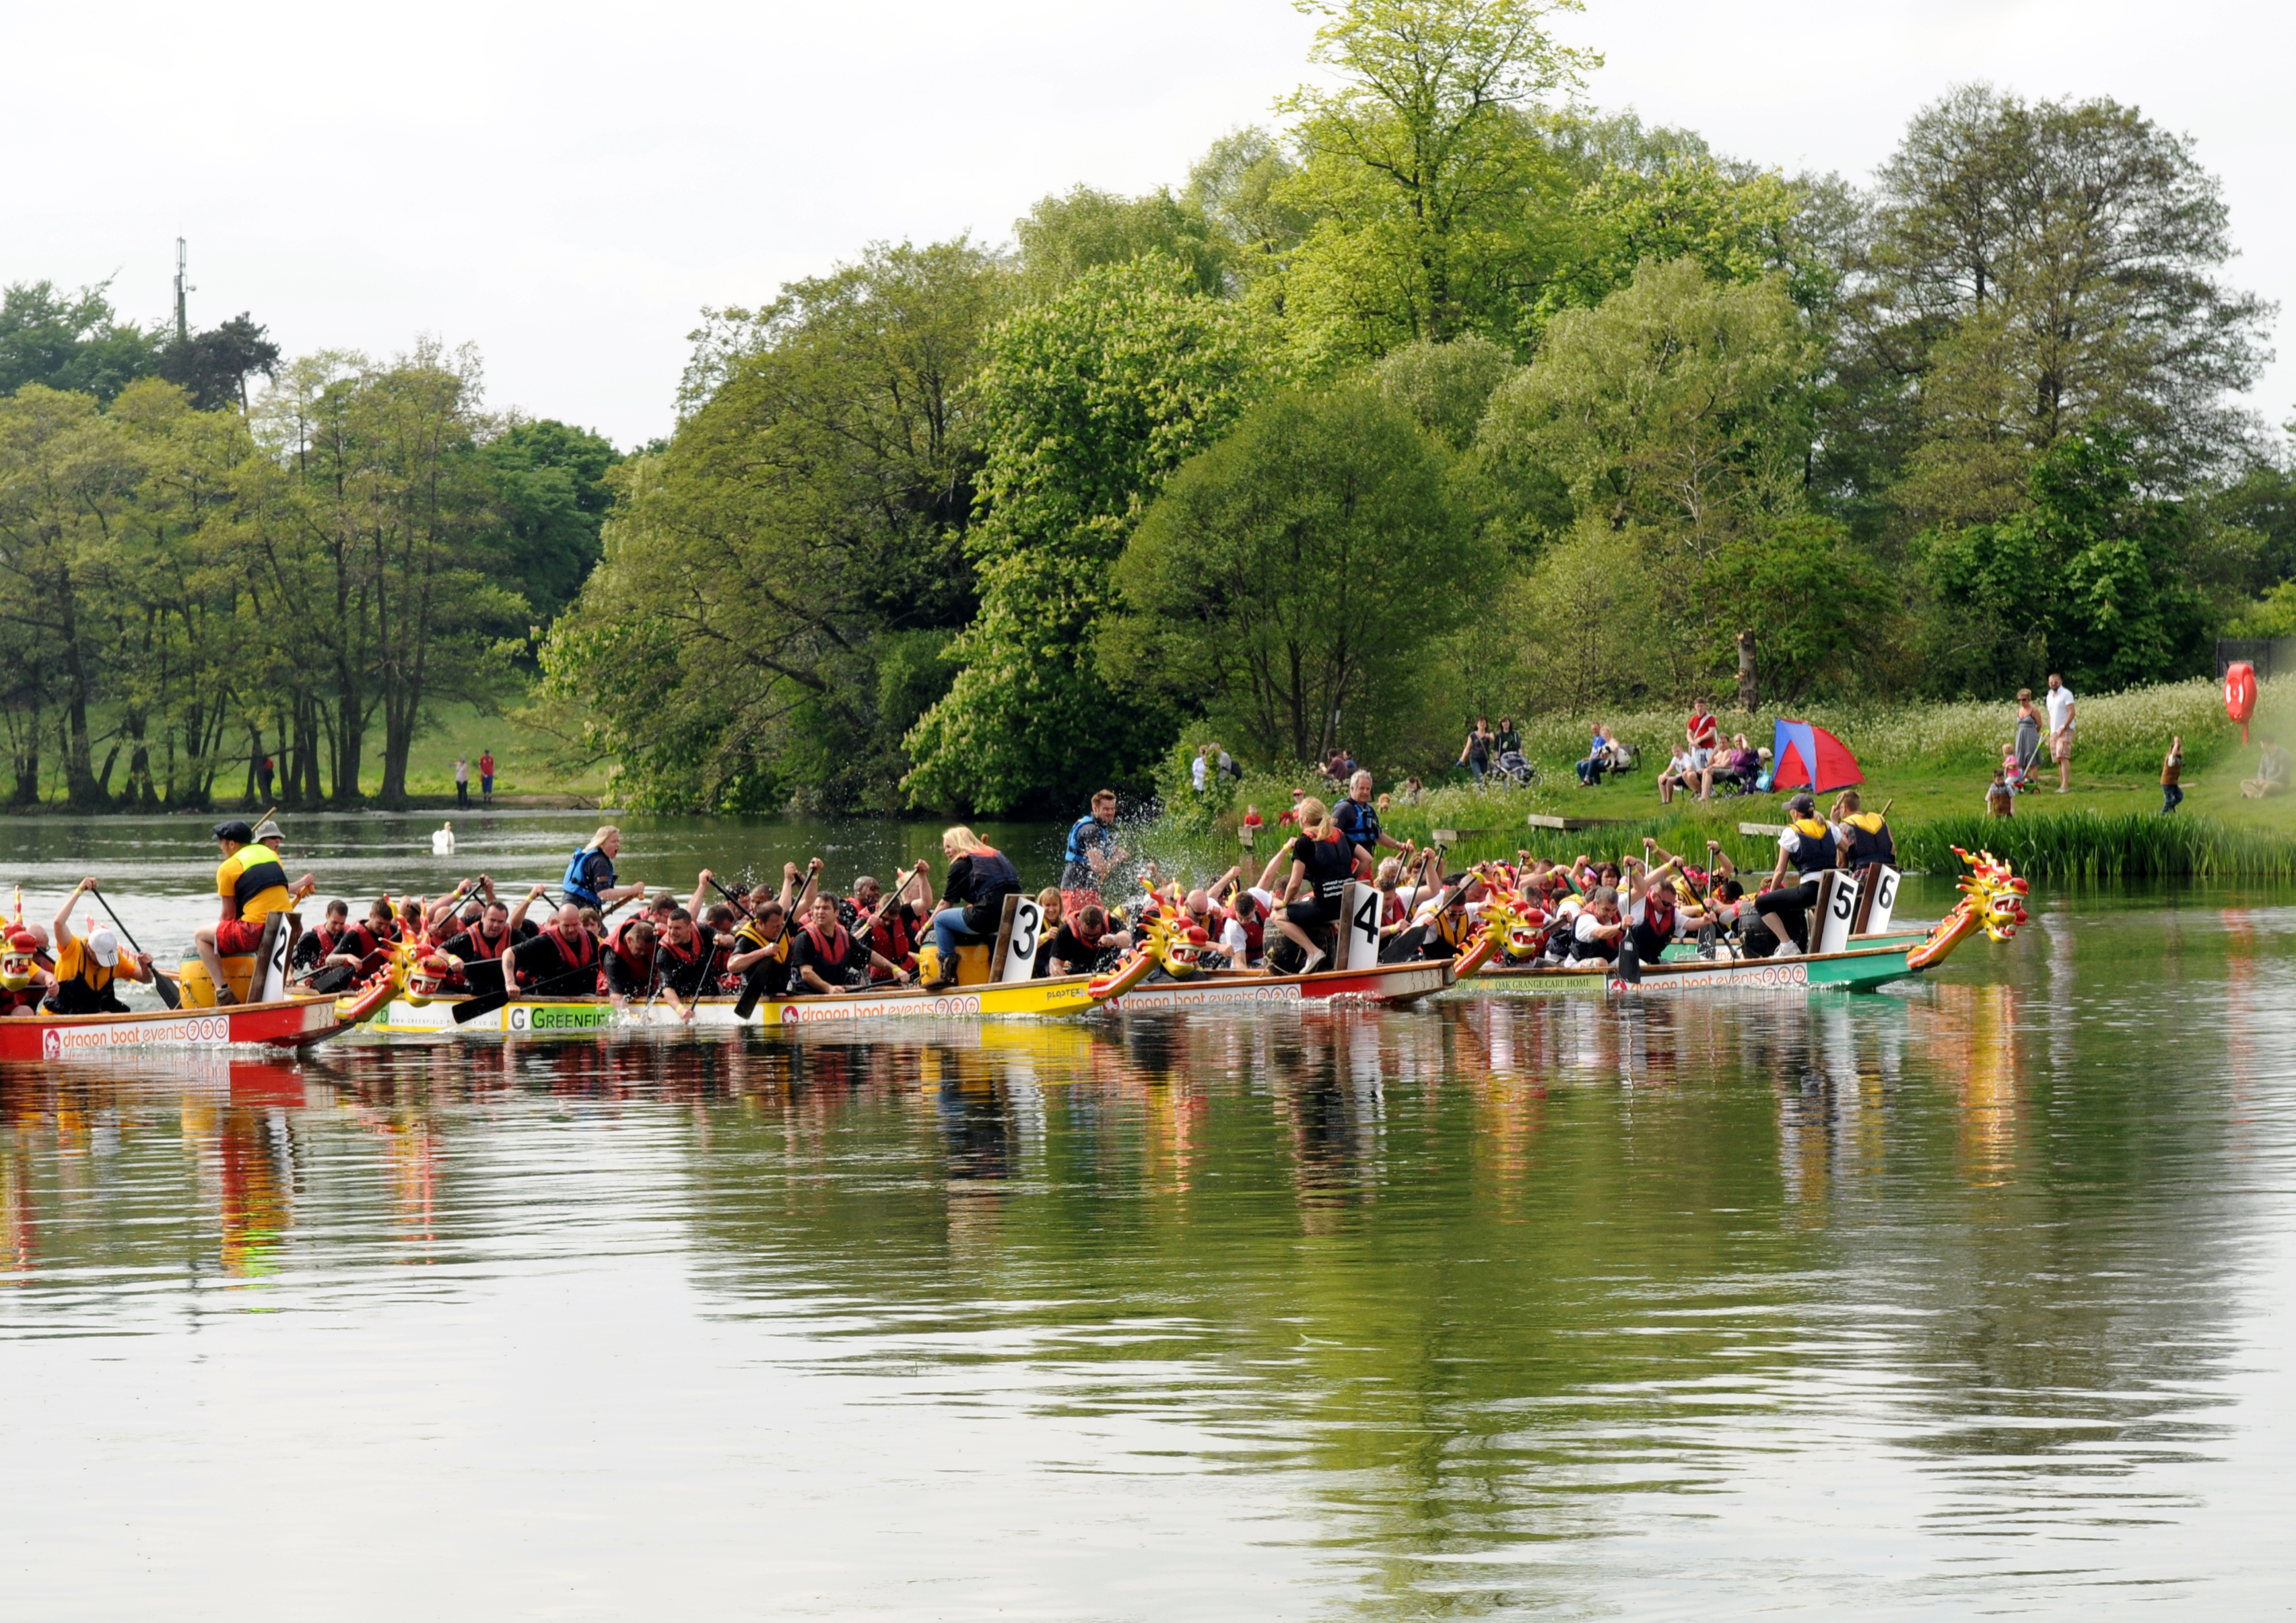 (c) Rotarydragonboats.co.uk